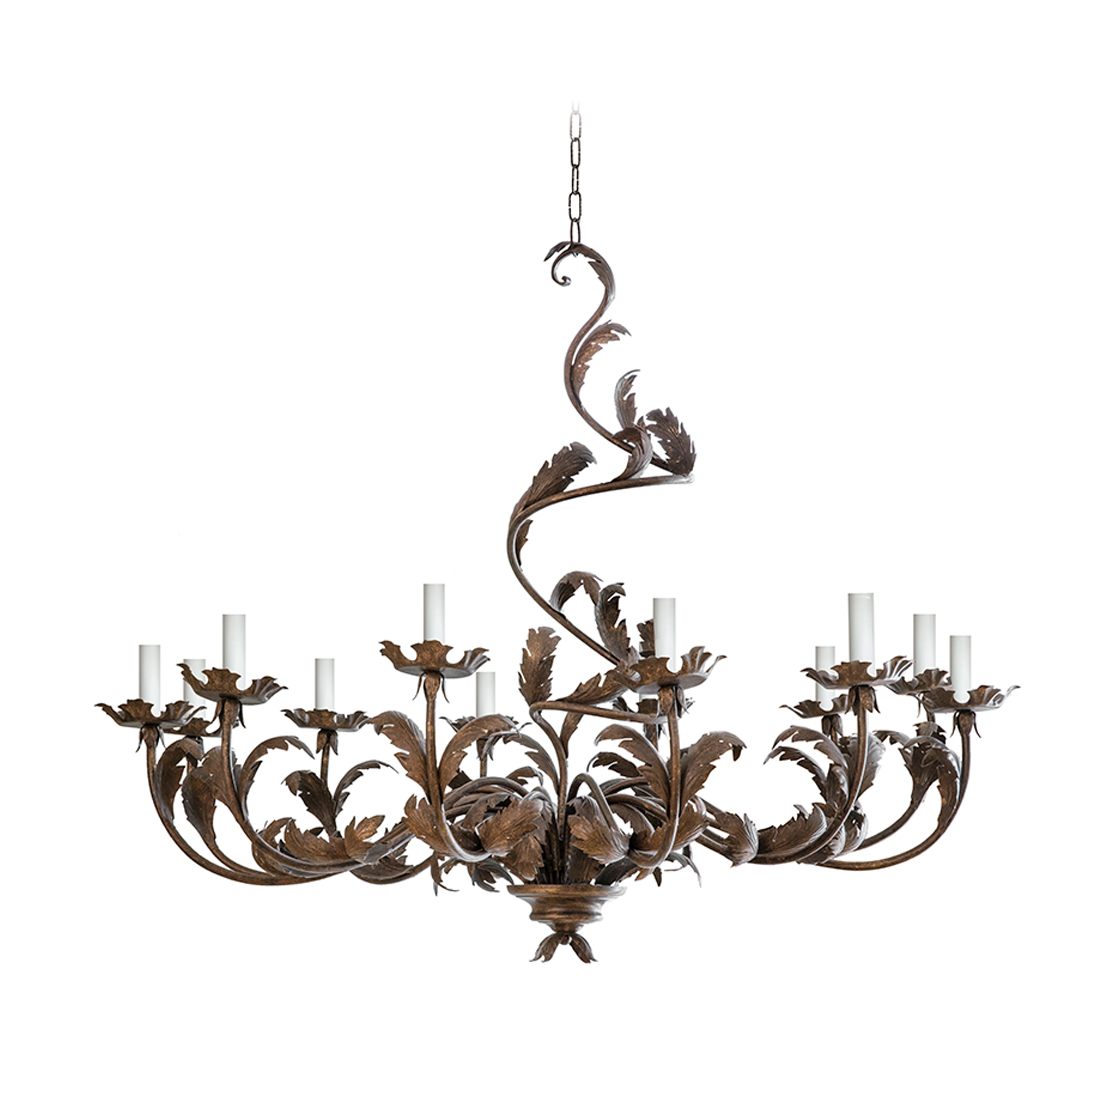 Borghese chandelier 12 arms - Wrought iron - Beaumont & Fletcher